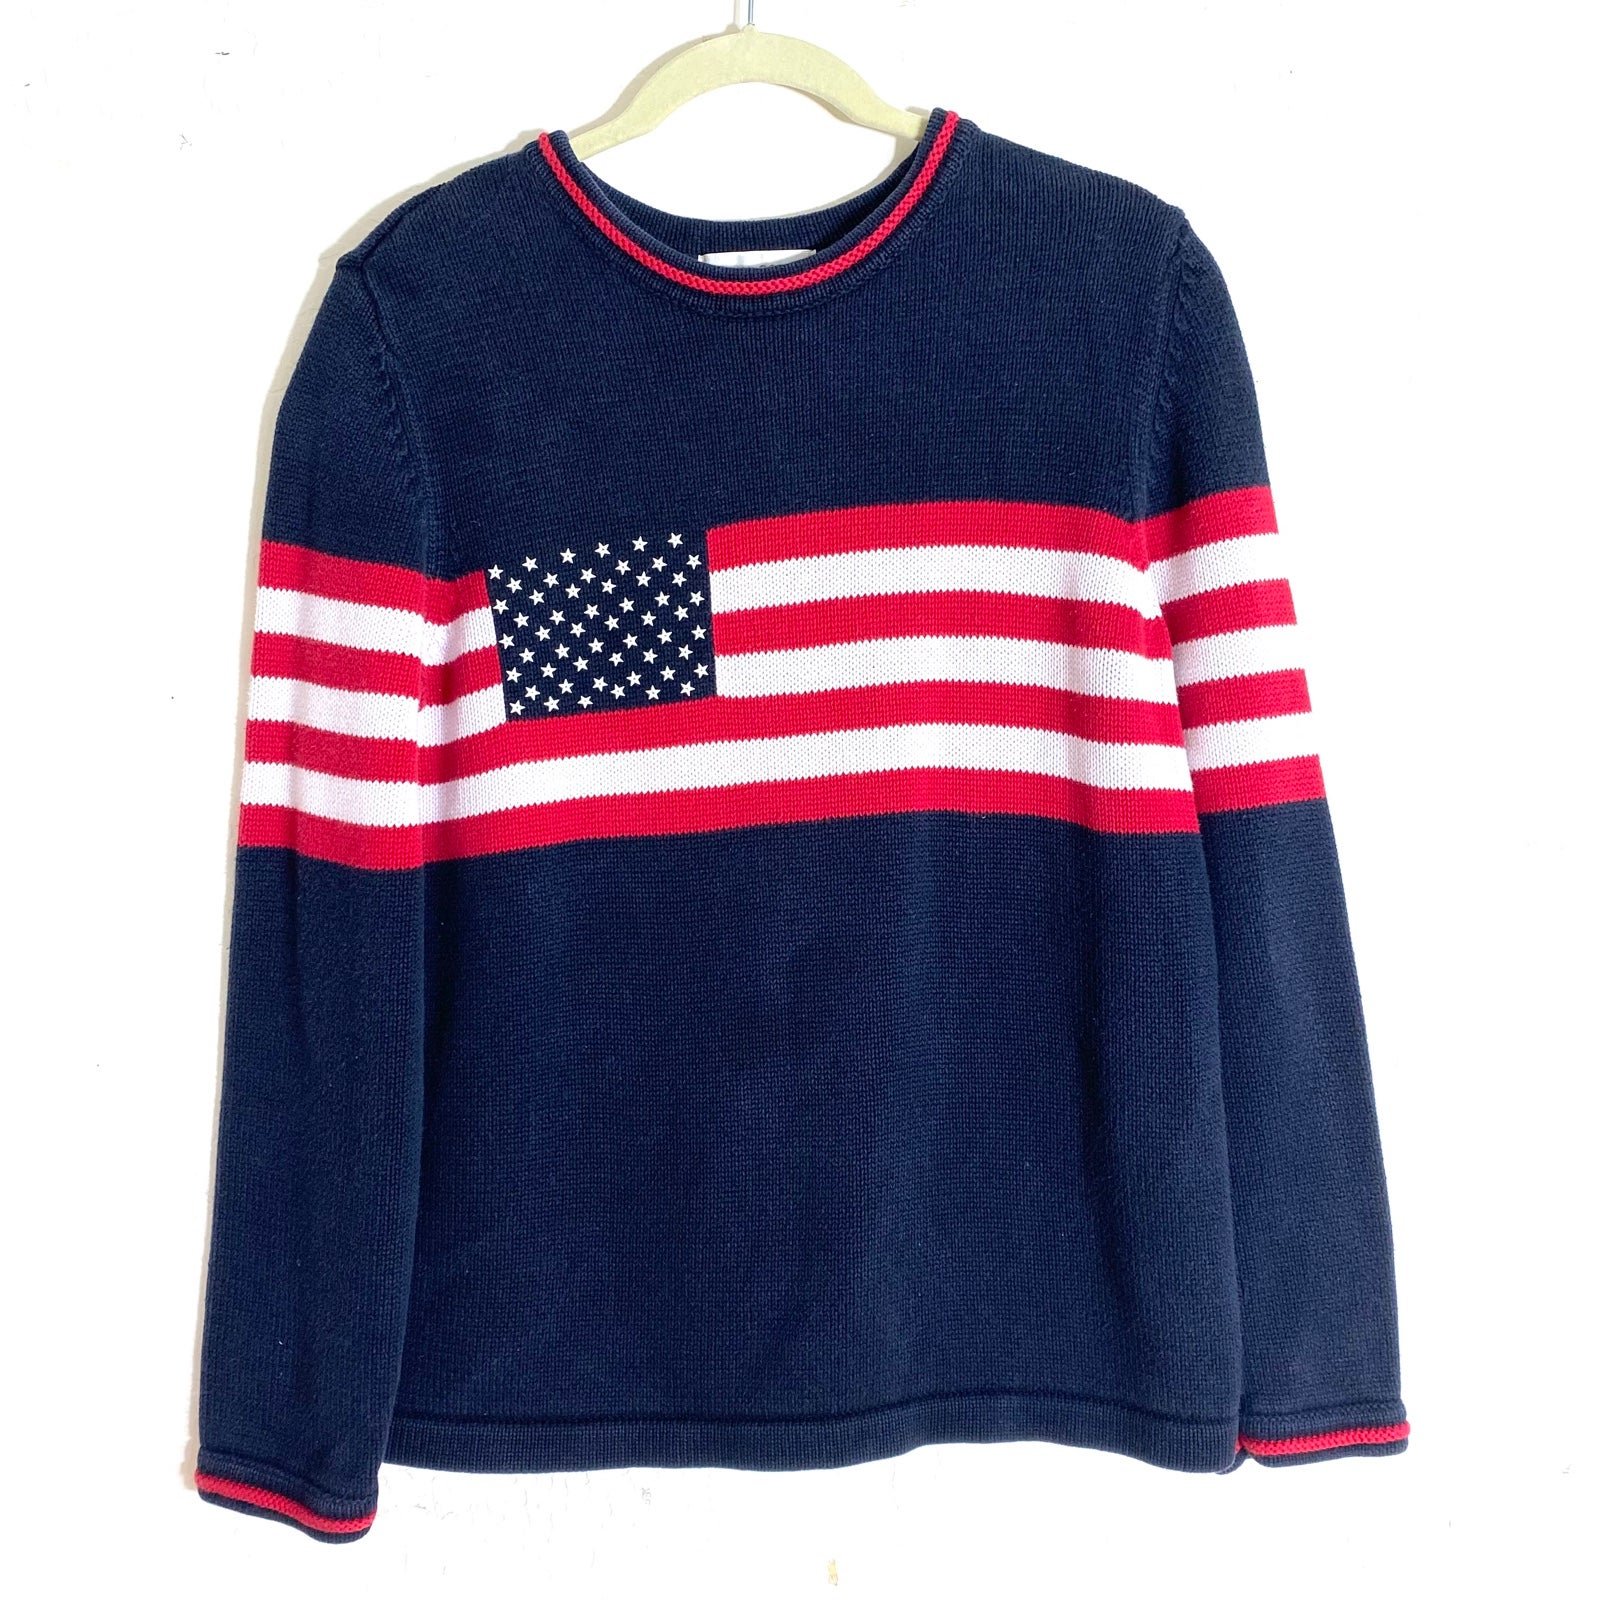 High quality Vintage Casual Corner Flag Sweater Red White and Blue Stars Stripes 100% Cotton p9SMcMV4g US Sale